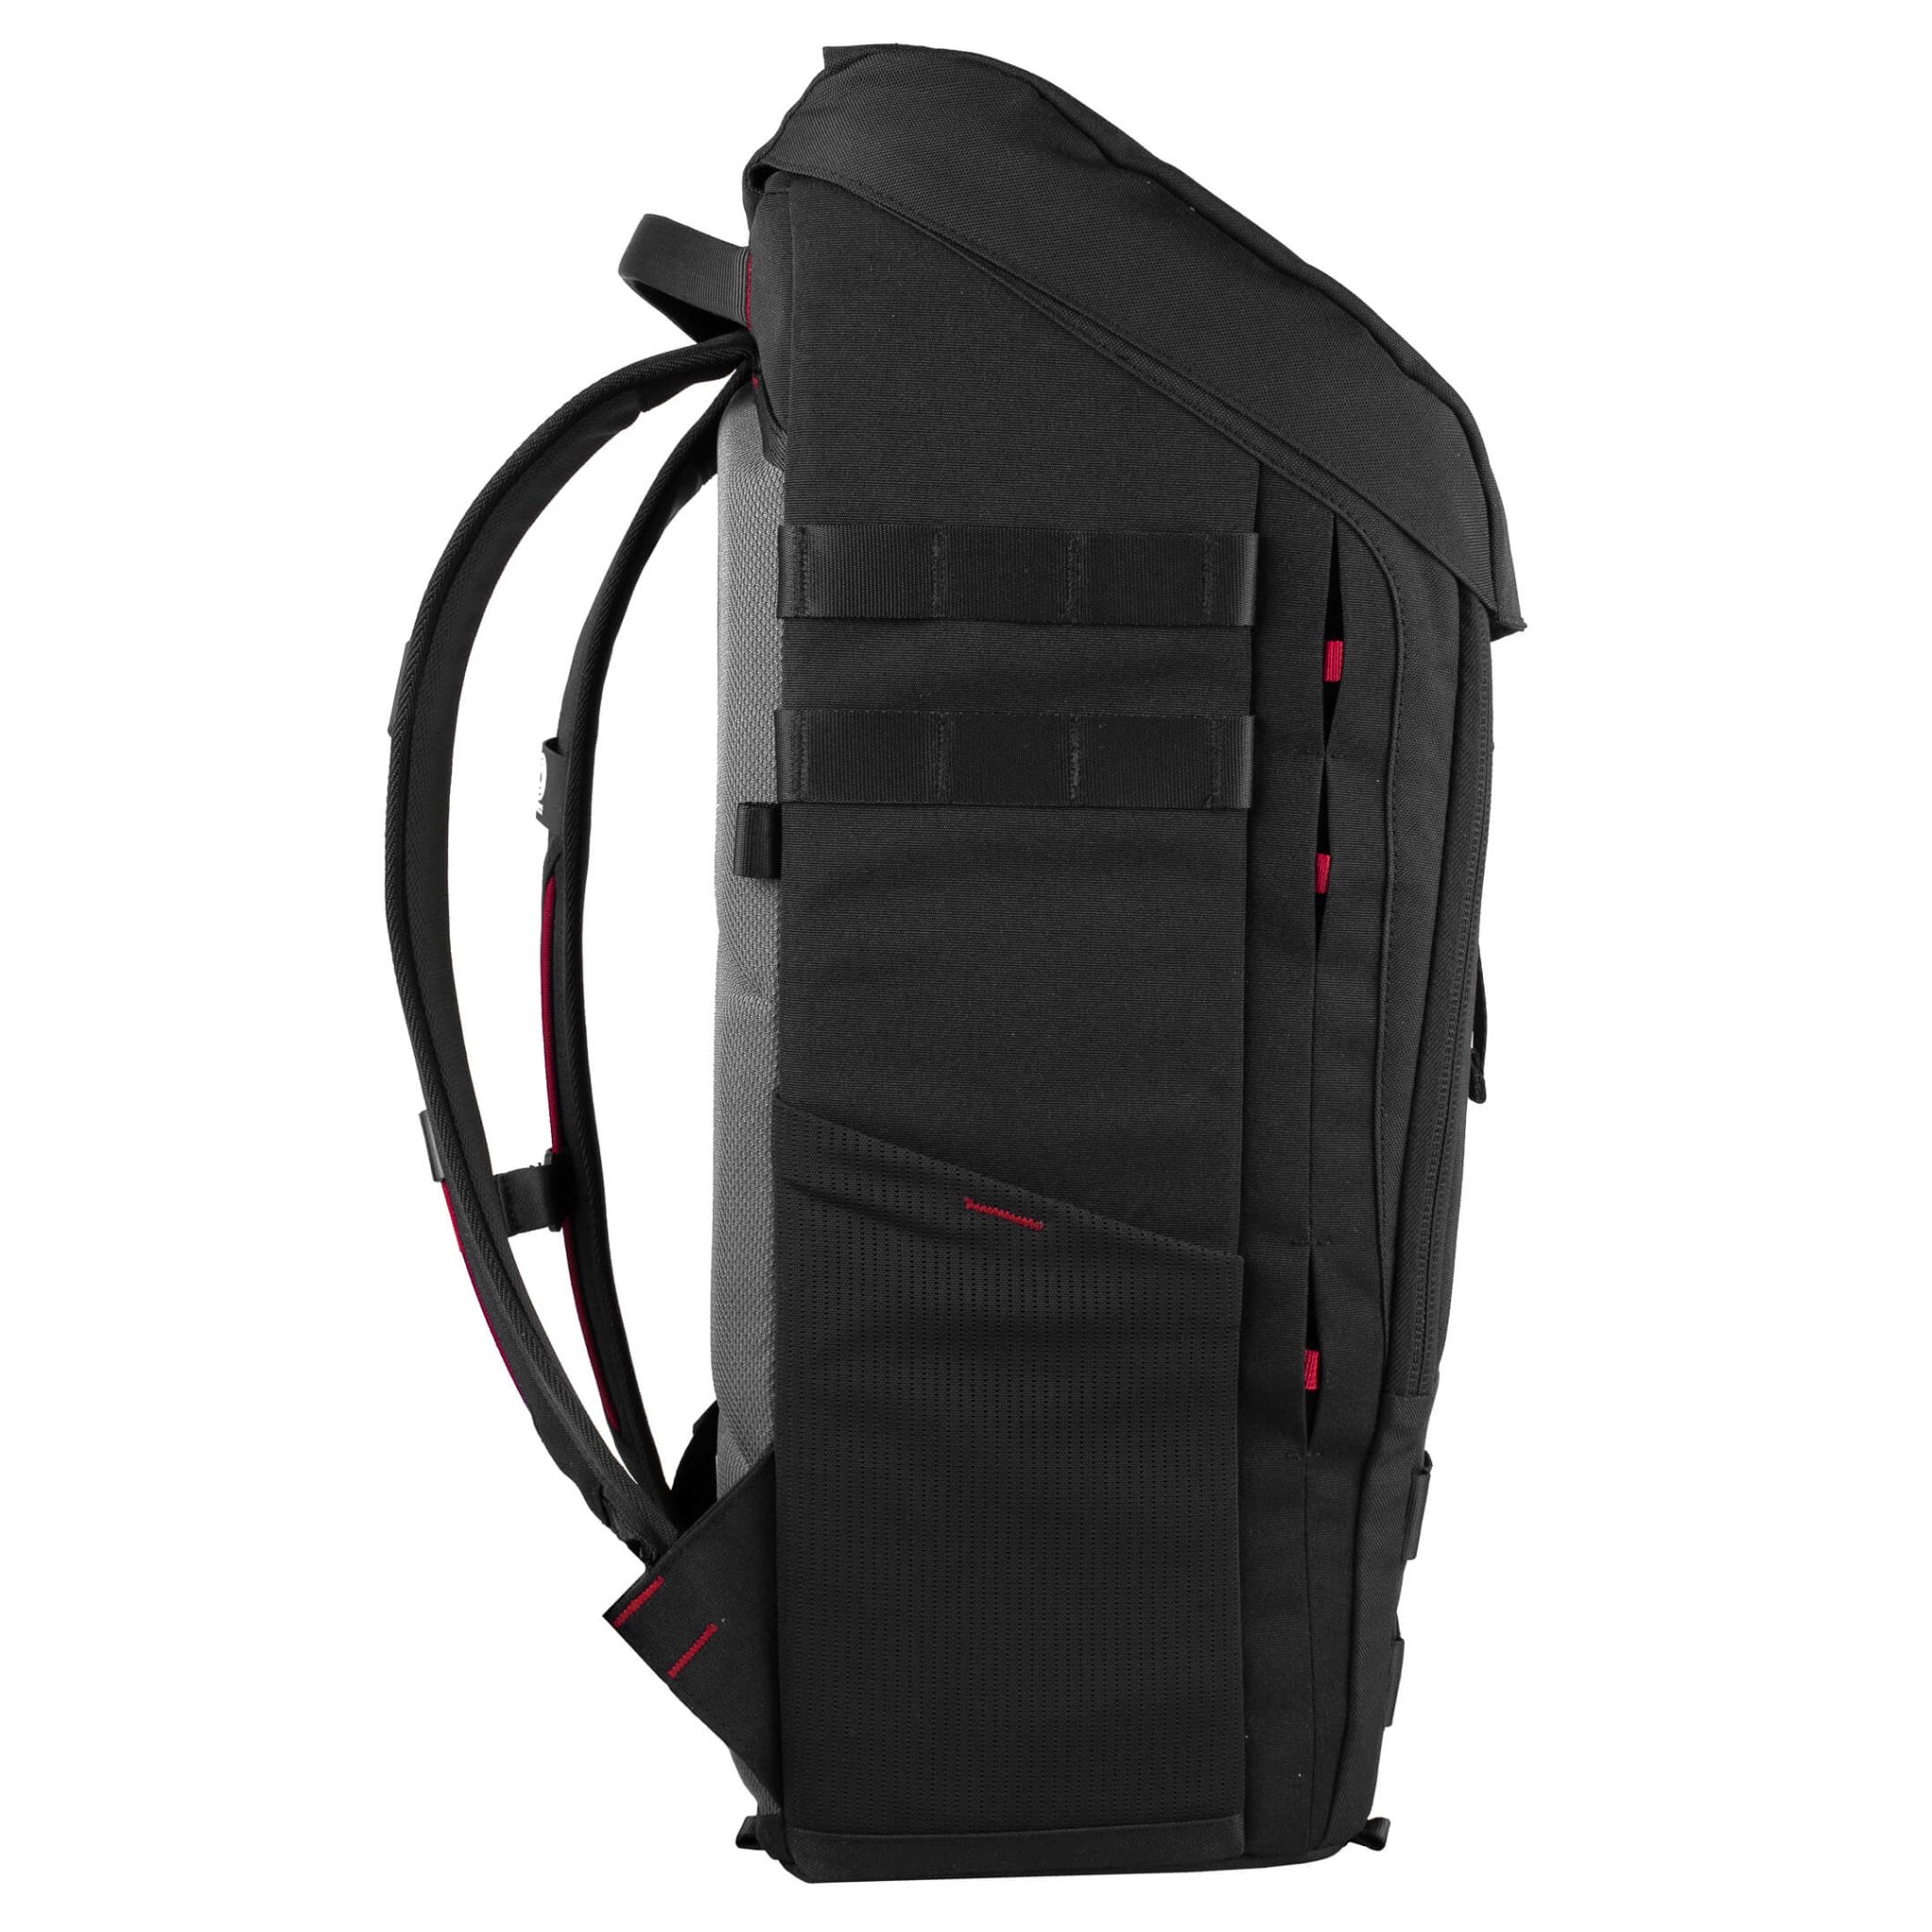 Torvol Urban Carrier Backpack - Your All-Round Freestyle Backpack 2 - Torvol - Drone Authority